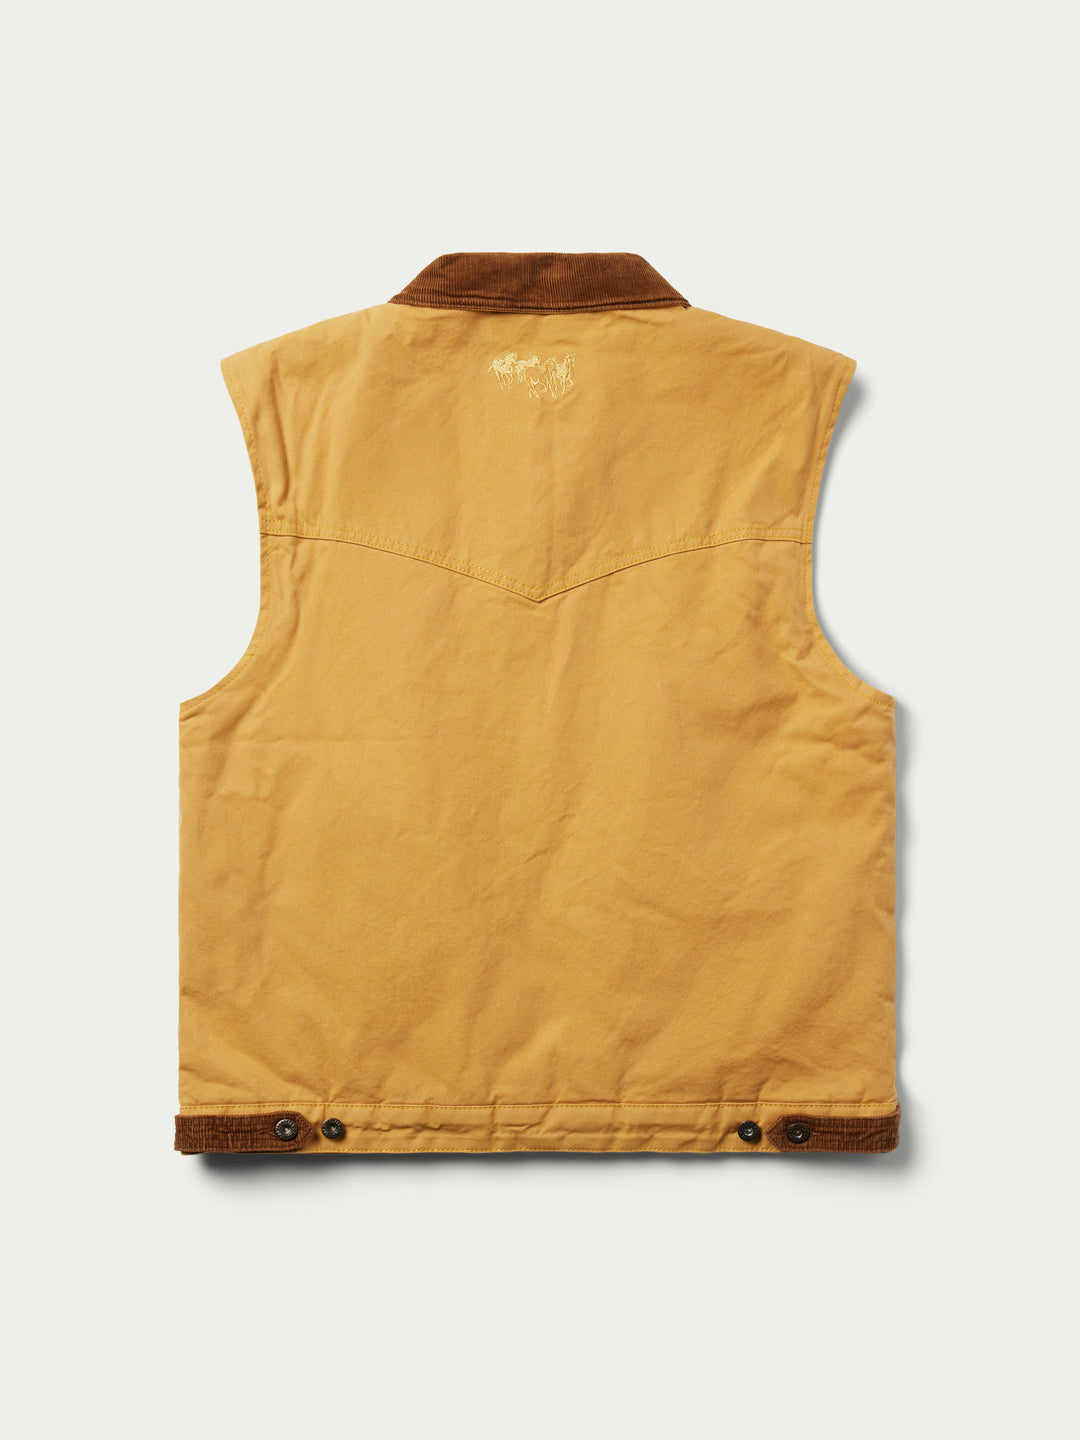 Zip Canvas Vest with Sherpa Lining - Schaefer Outfitter